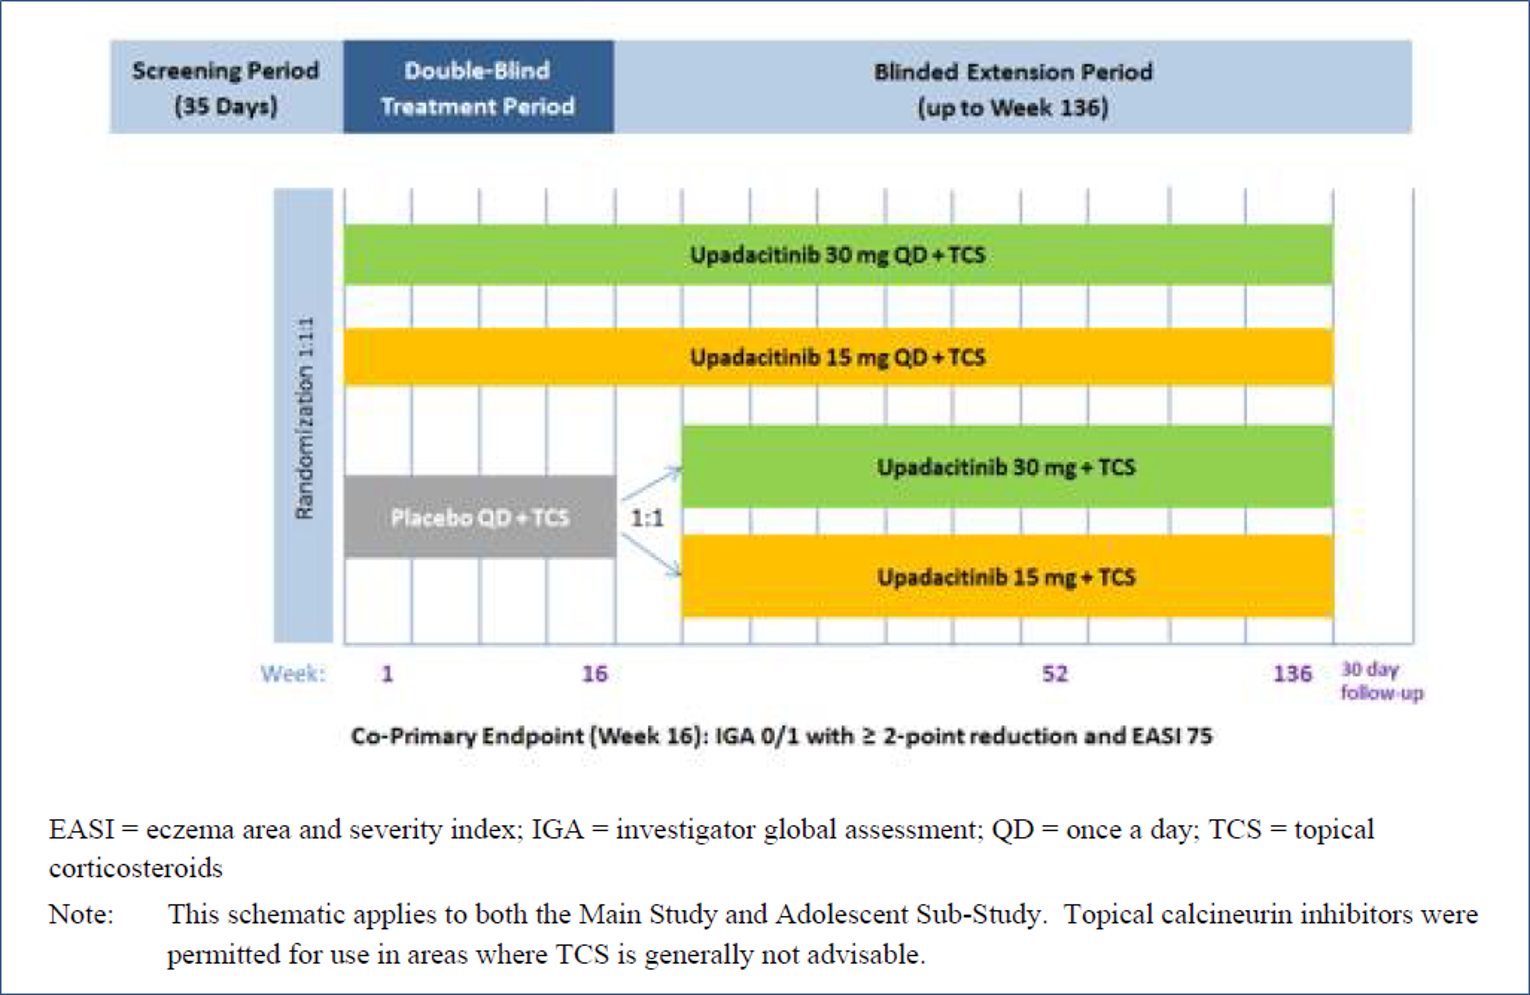 Figure depicts the study design initiating with screening phase and randomization. The double-blind period includes the three arms (upadacitinib 30 mg, upadacitinib 15 mg, and placebo, each plus topical corticosteroids.